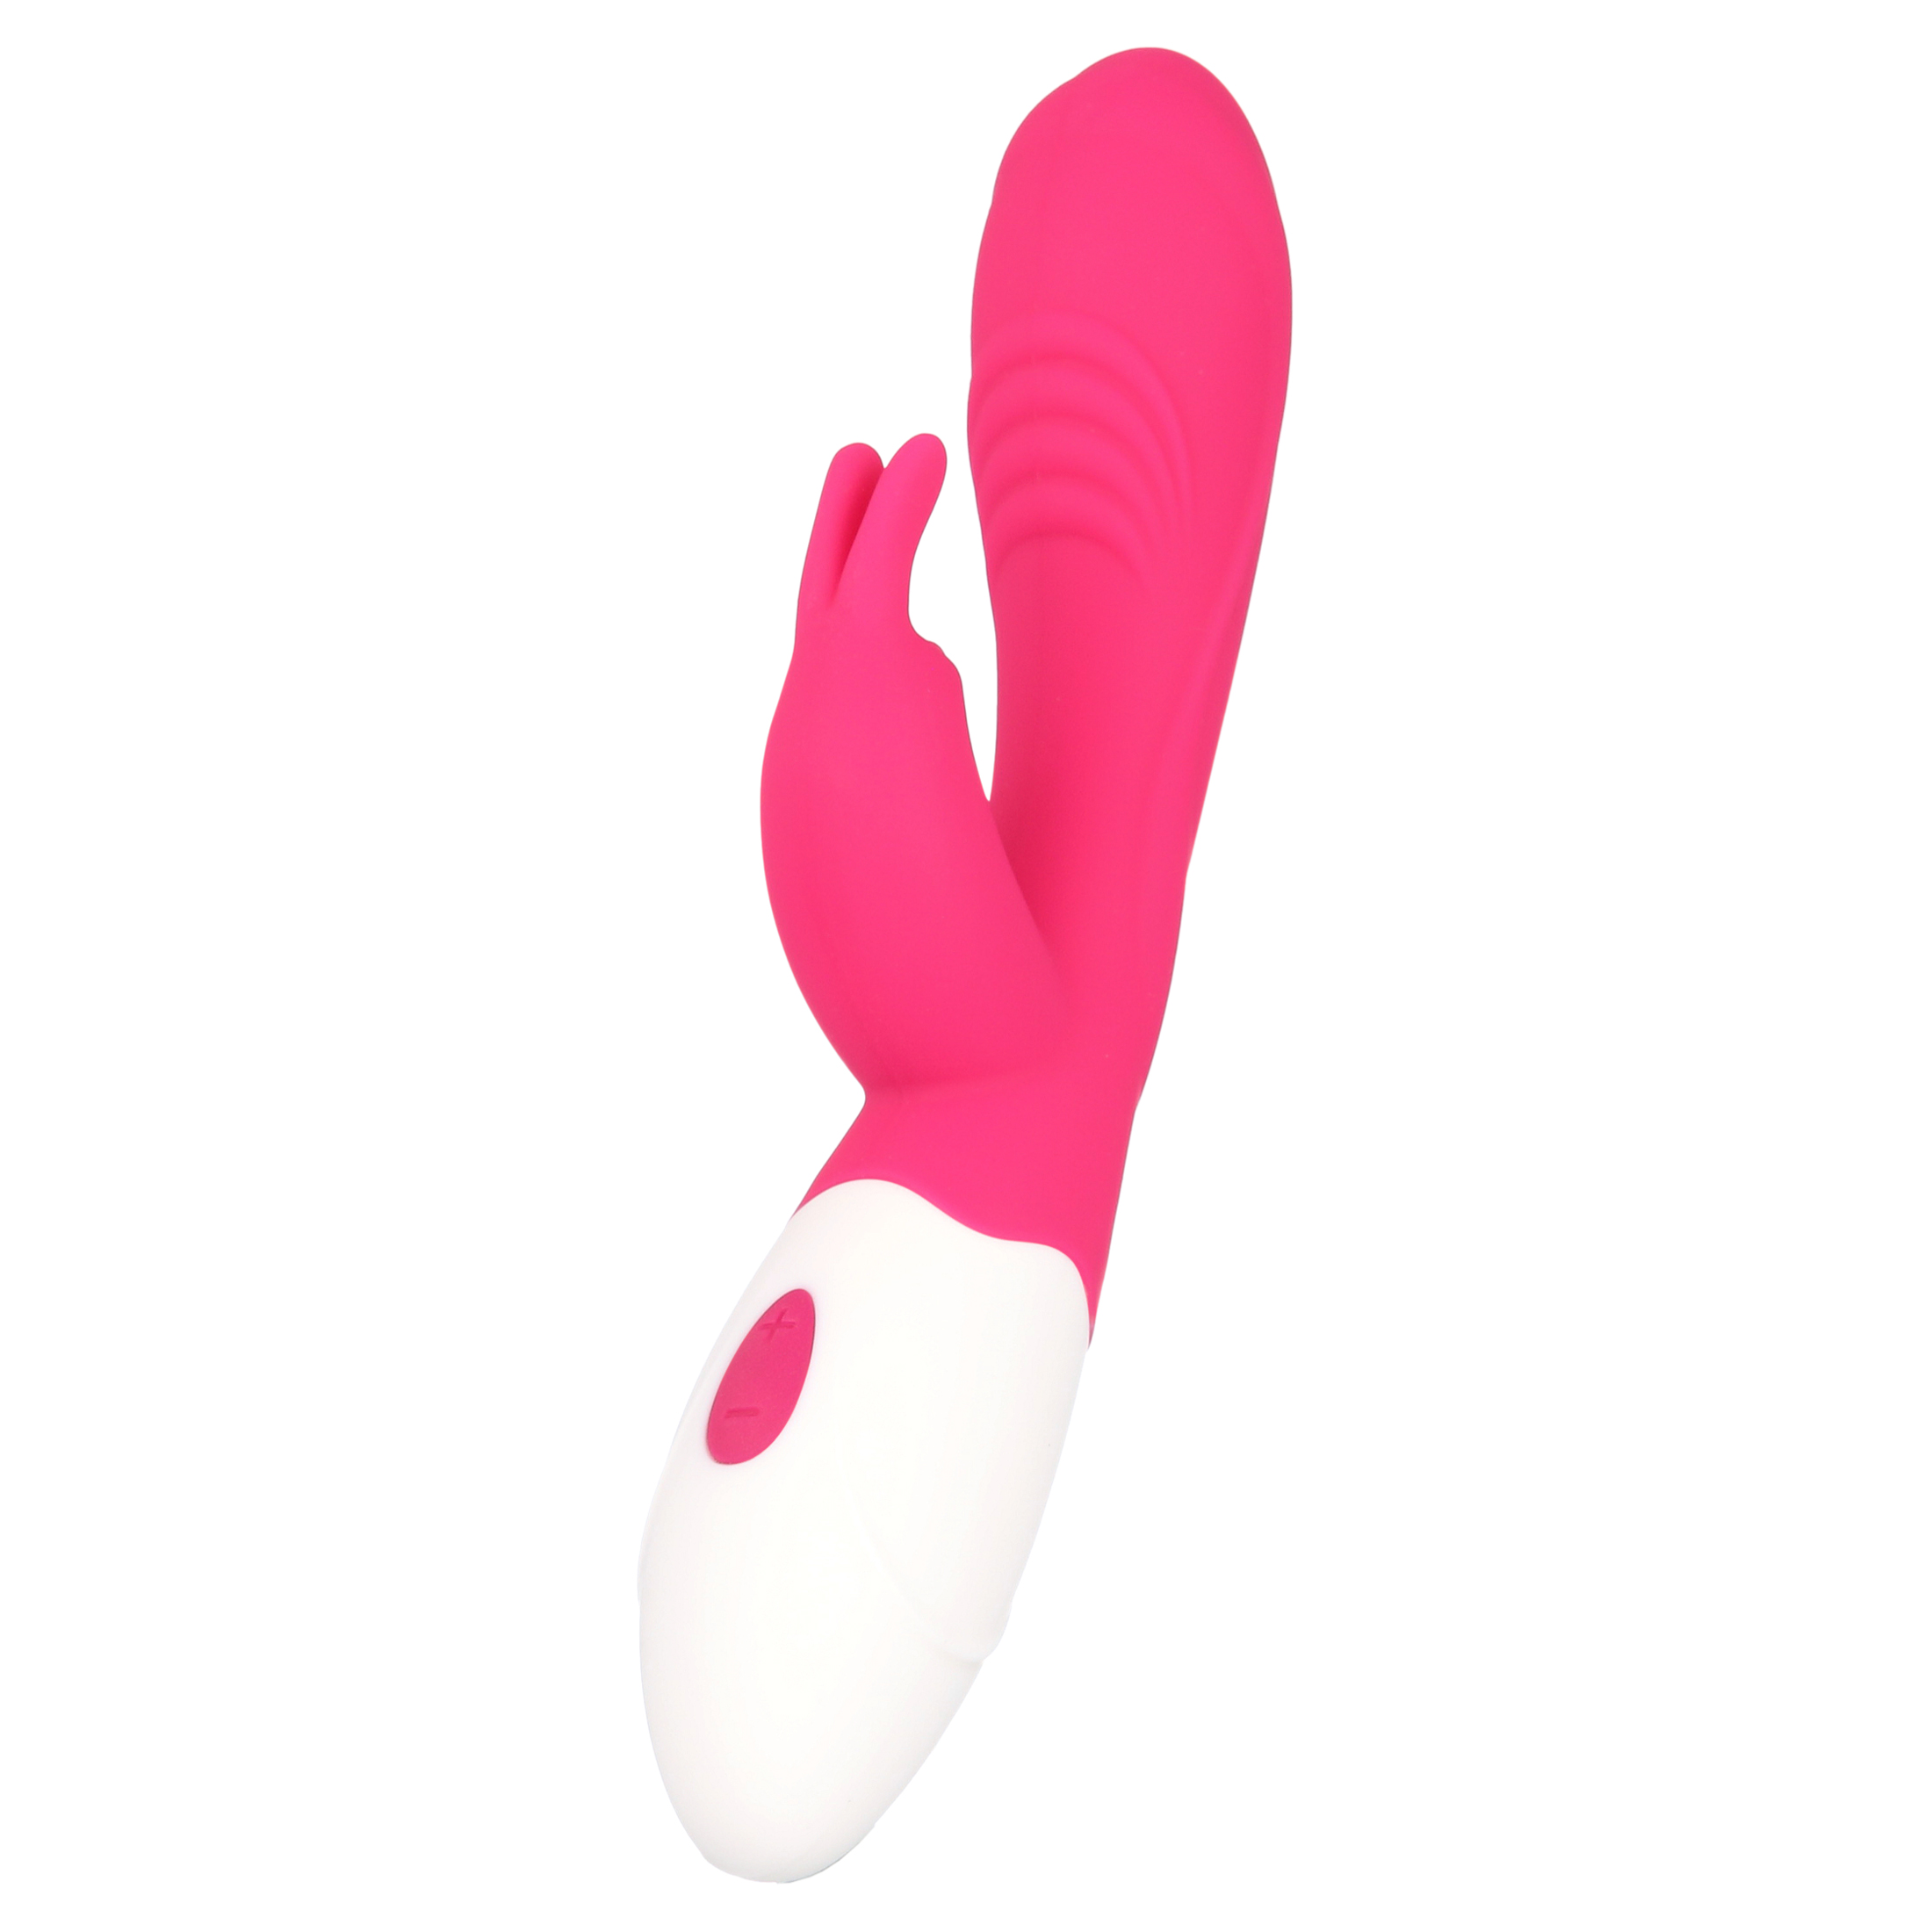 Rabbit Lily Vibrator Dual Pleasure G-Spot and Clitoral Waterproof Stimulator by Better Love - image 1 of 5